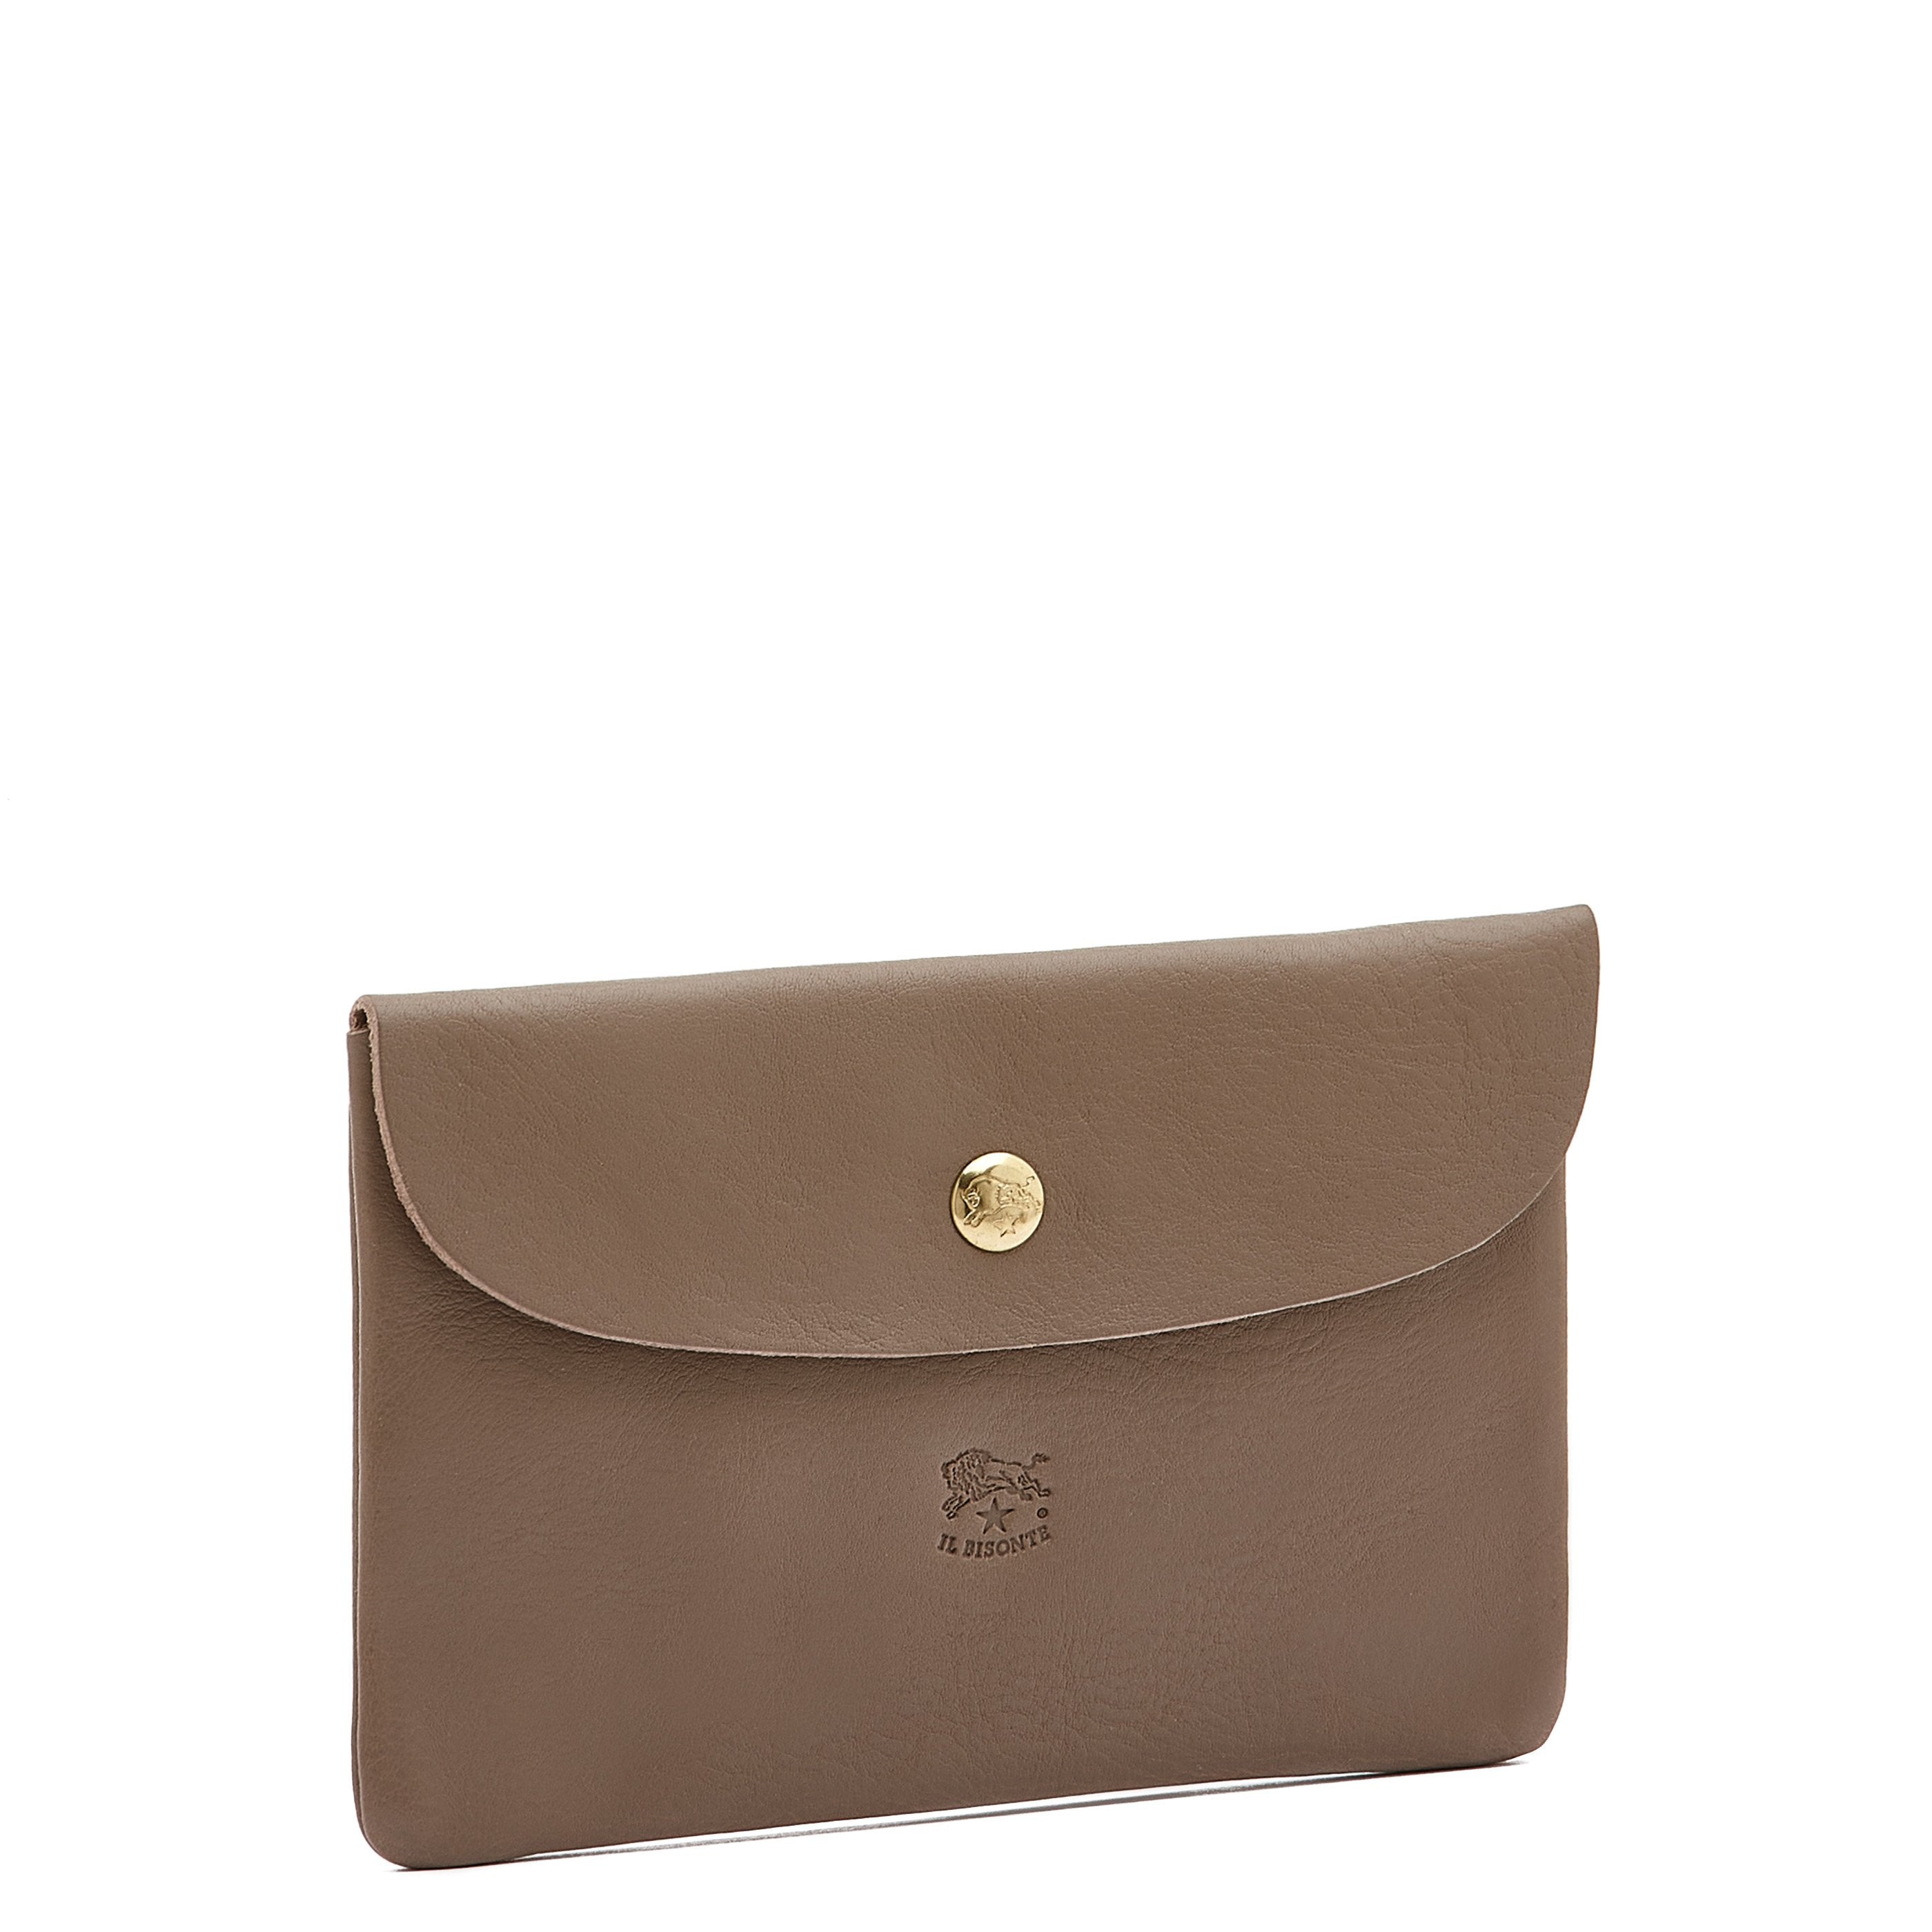 Case in Calf Leather color Light Grey